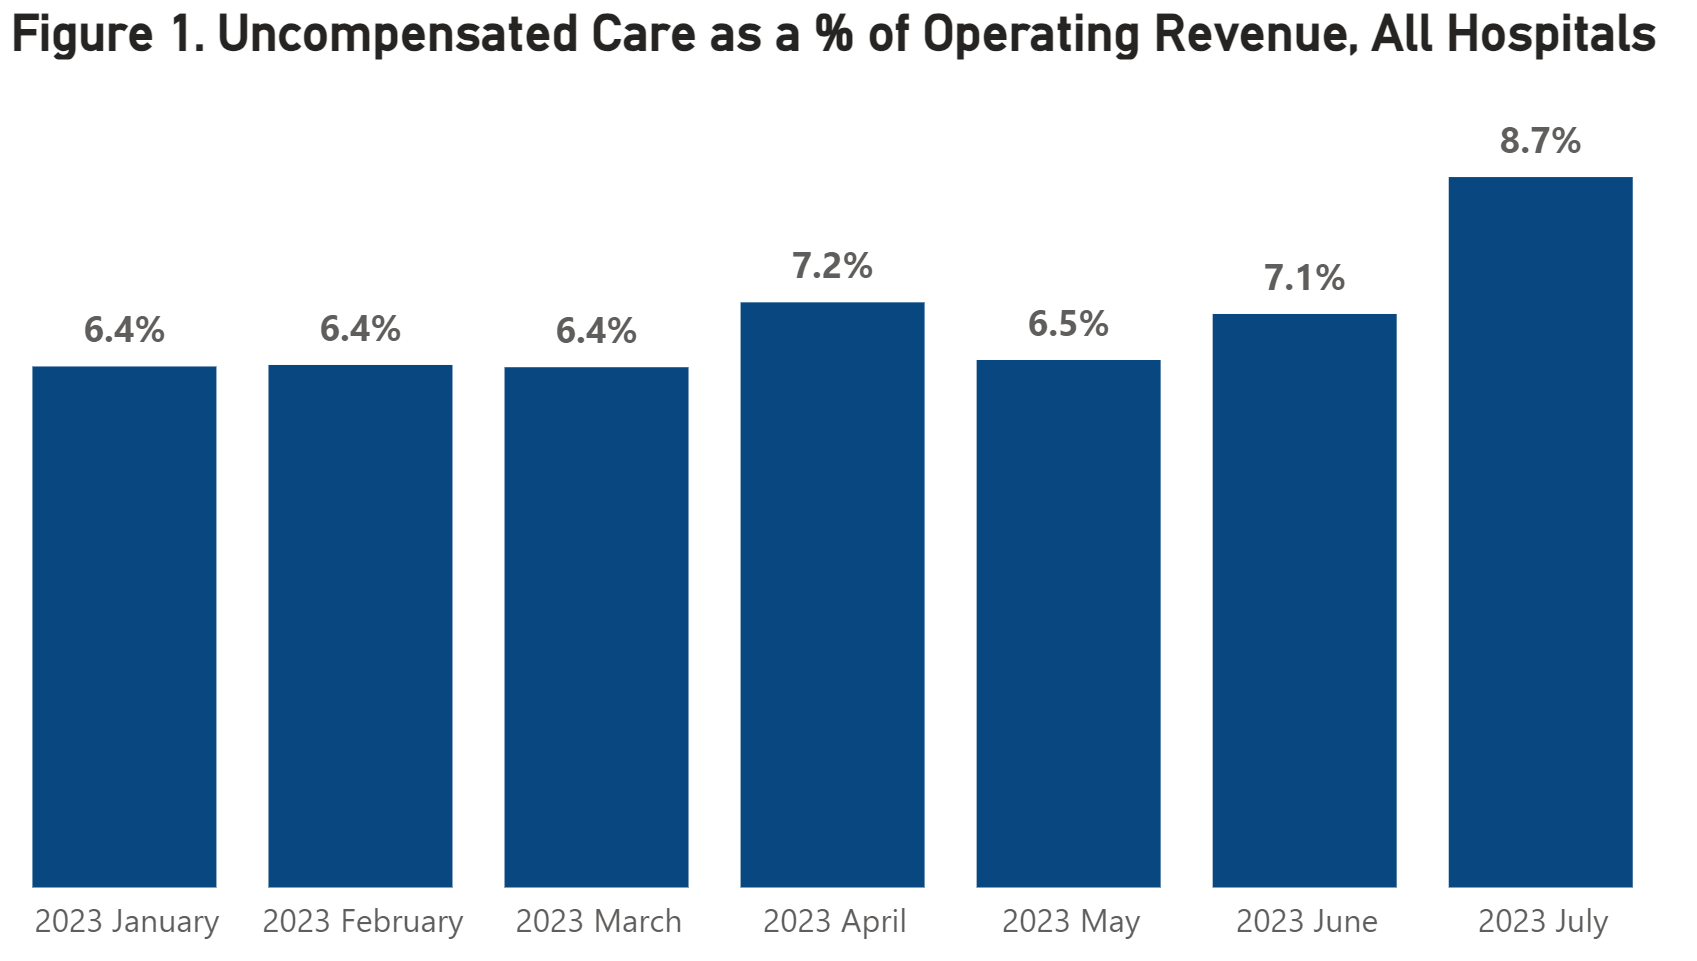 Figure 1. Uncompensated Care as a Percentage of Operating Revenue All Hospitals